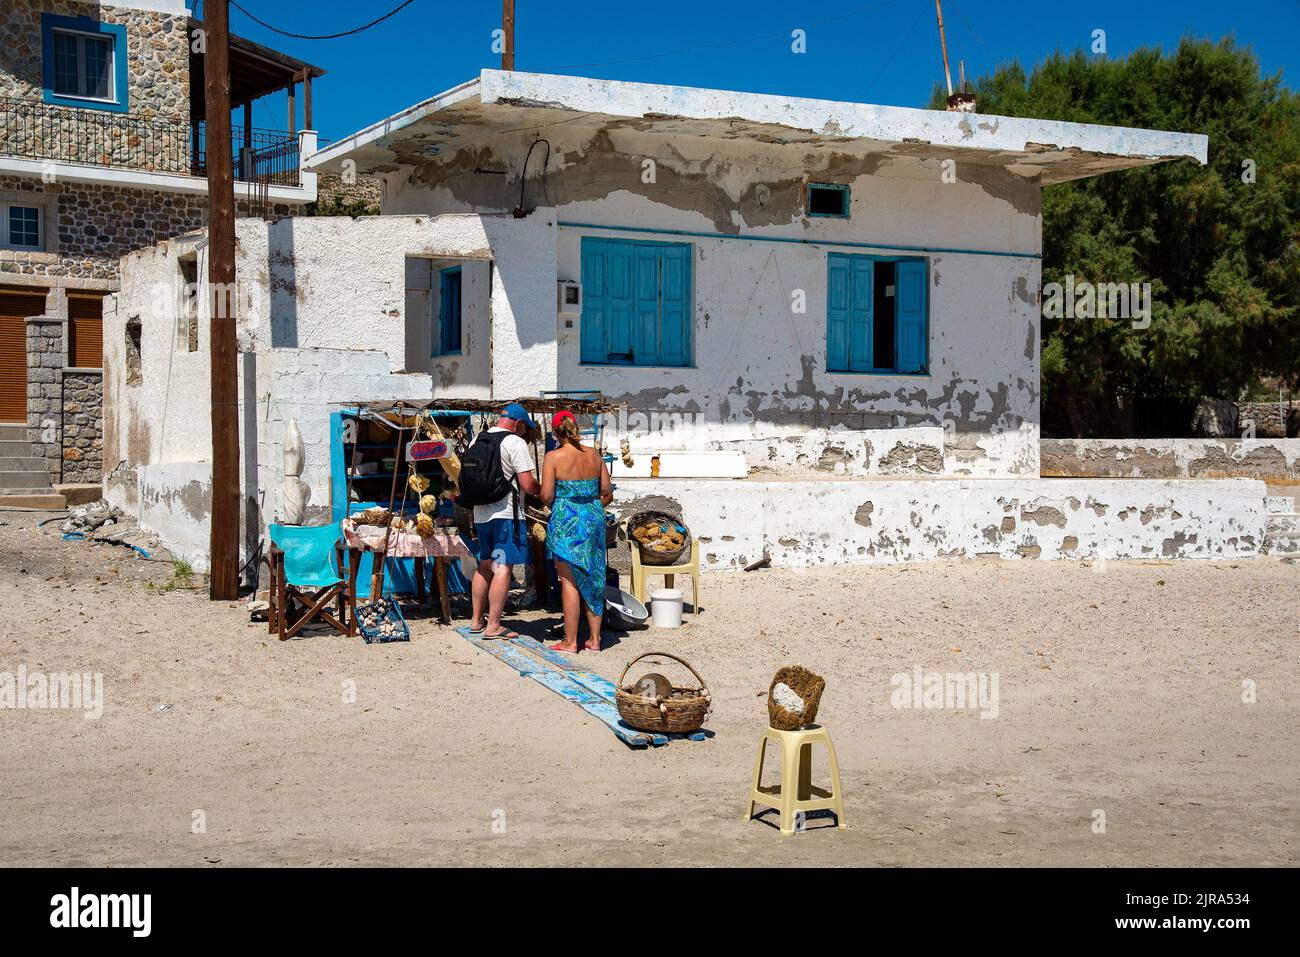 A stall selling sponges on the beach at Pserimos, Kalymnos, Dodecanese, South Aegean, Greece. Stock Photo